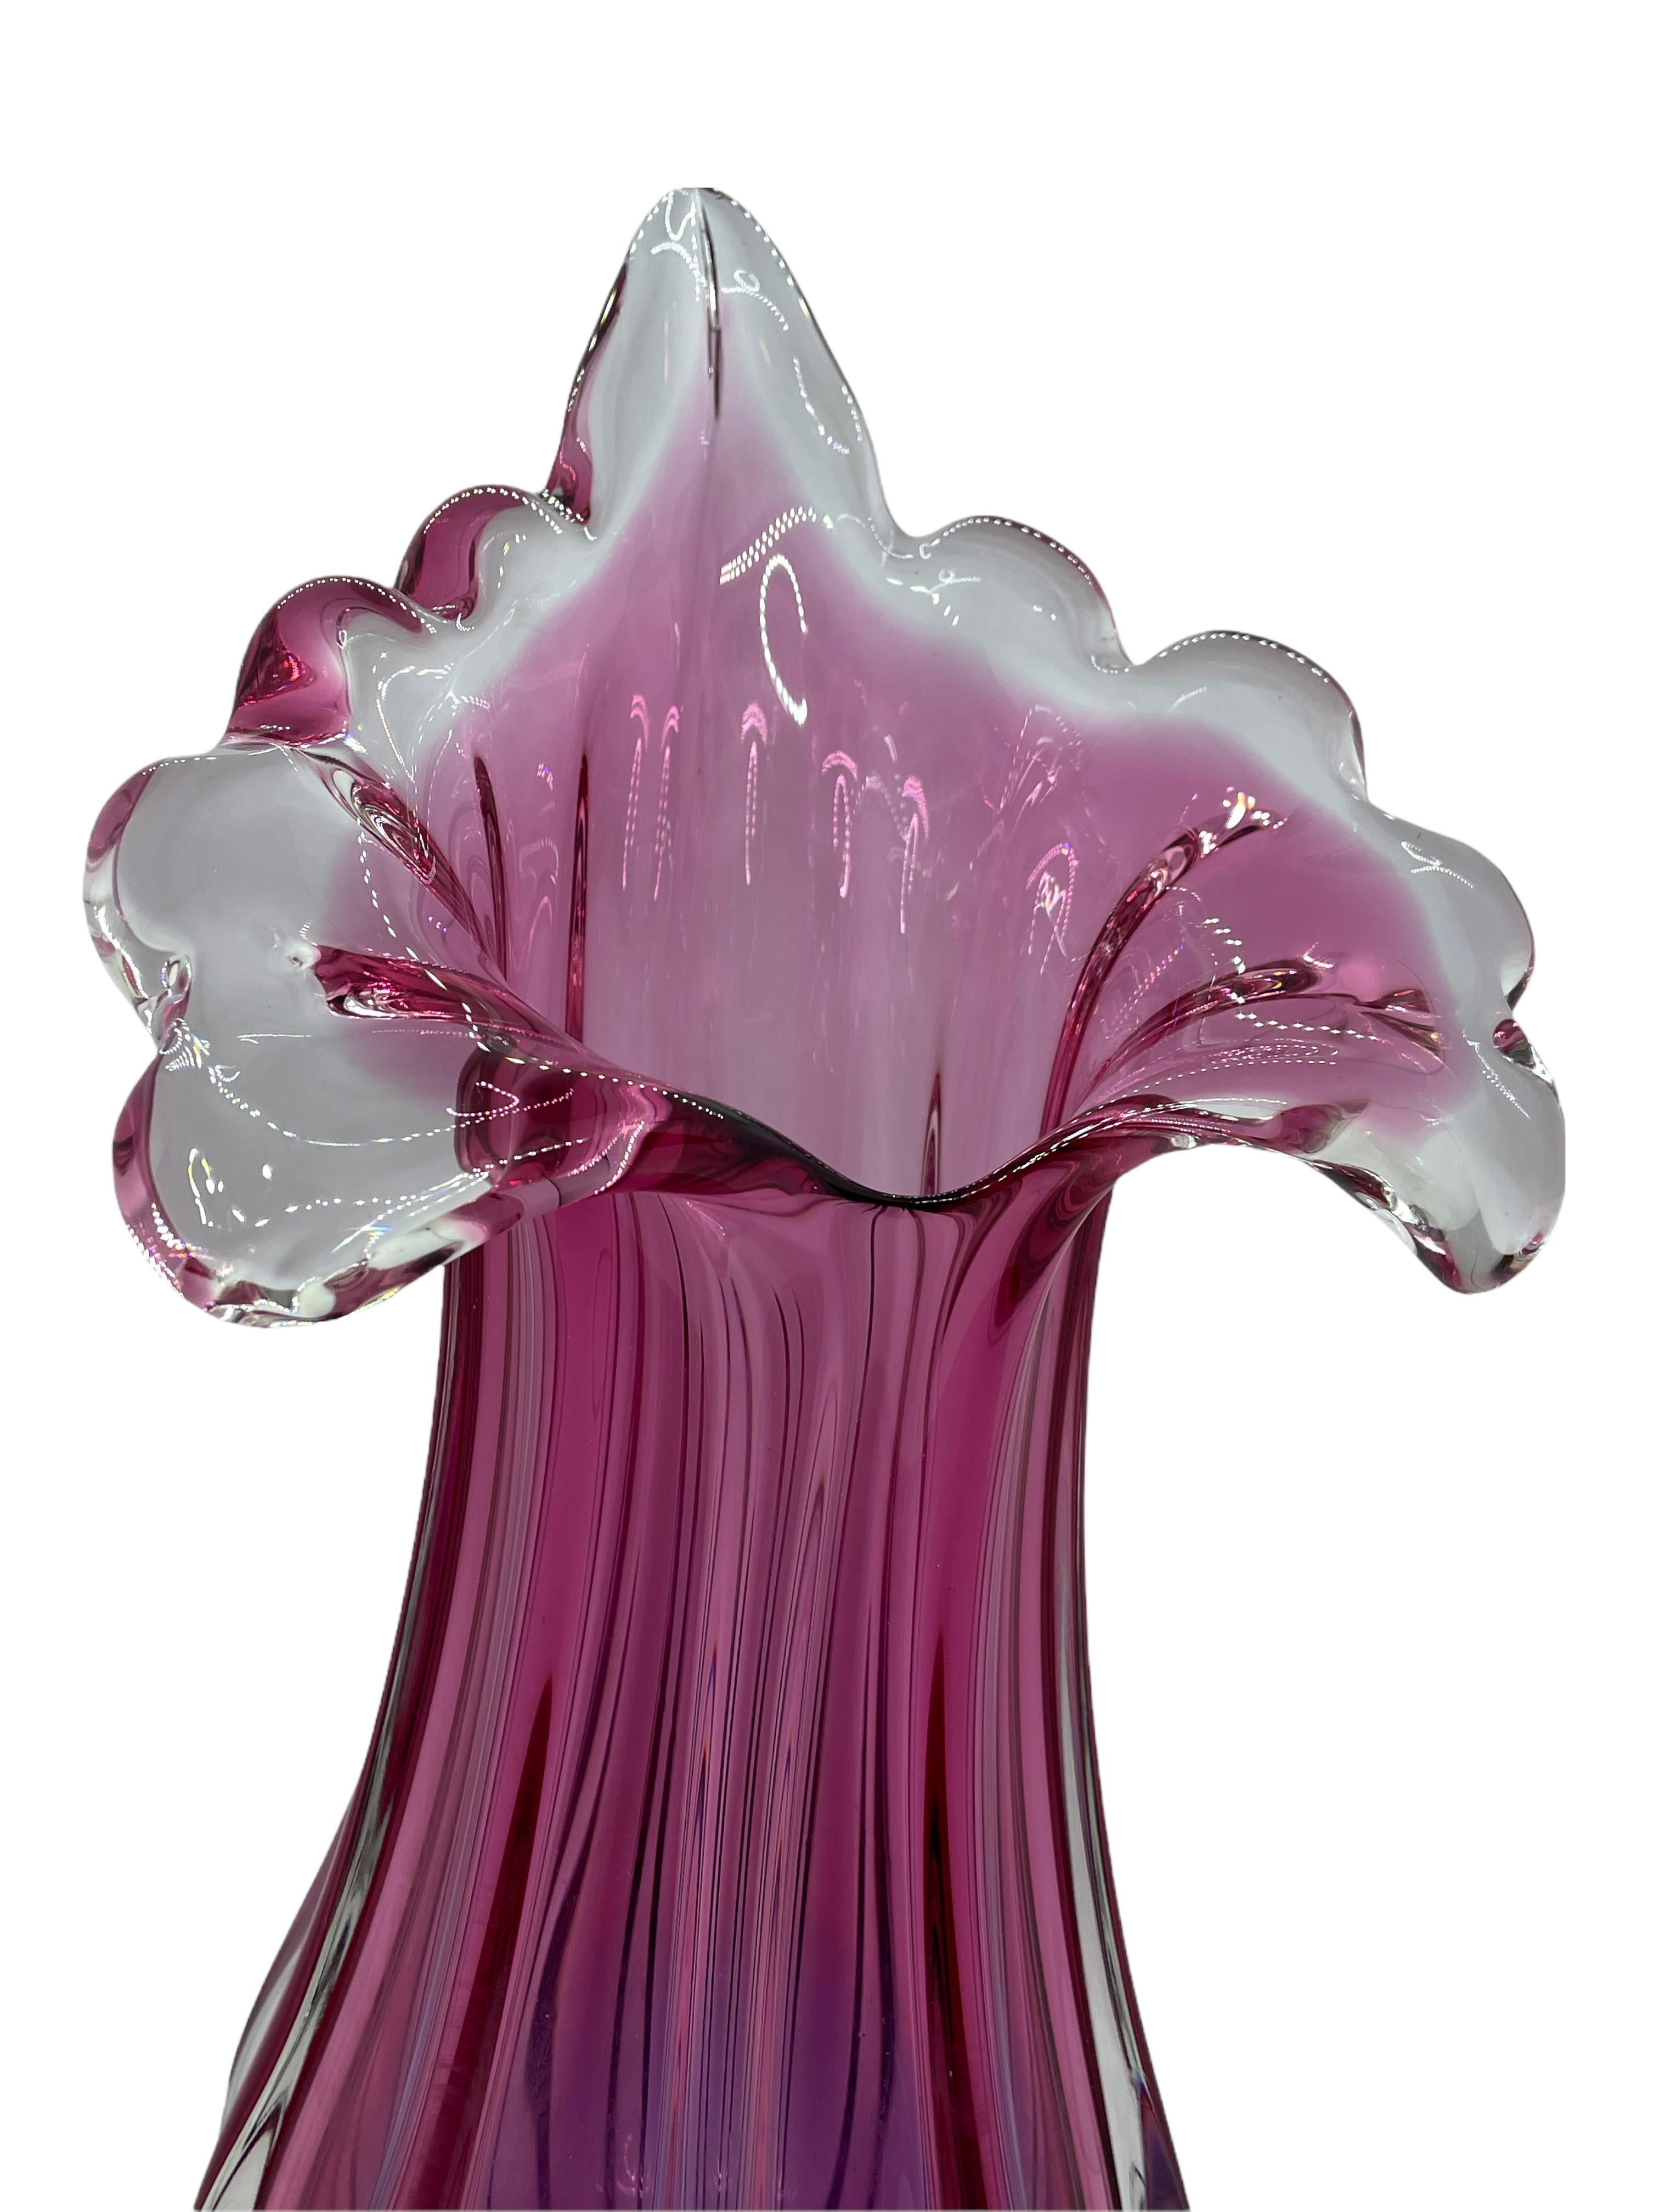 Hand-Crafted Pink Purple Clear Sommerso Art Glass Vase Object Sculpture Murano, Italy, 1970s